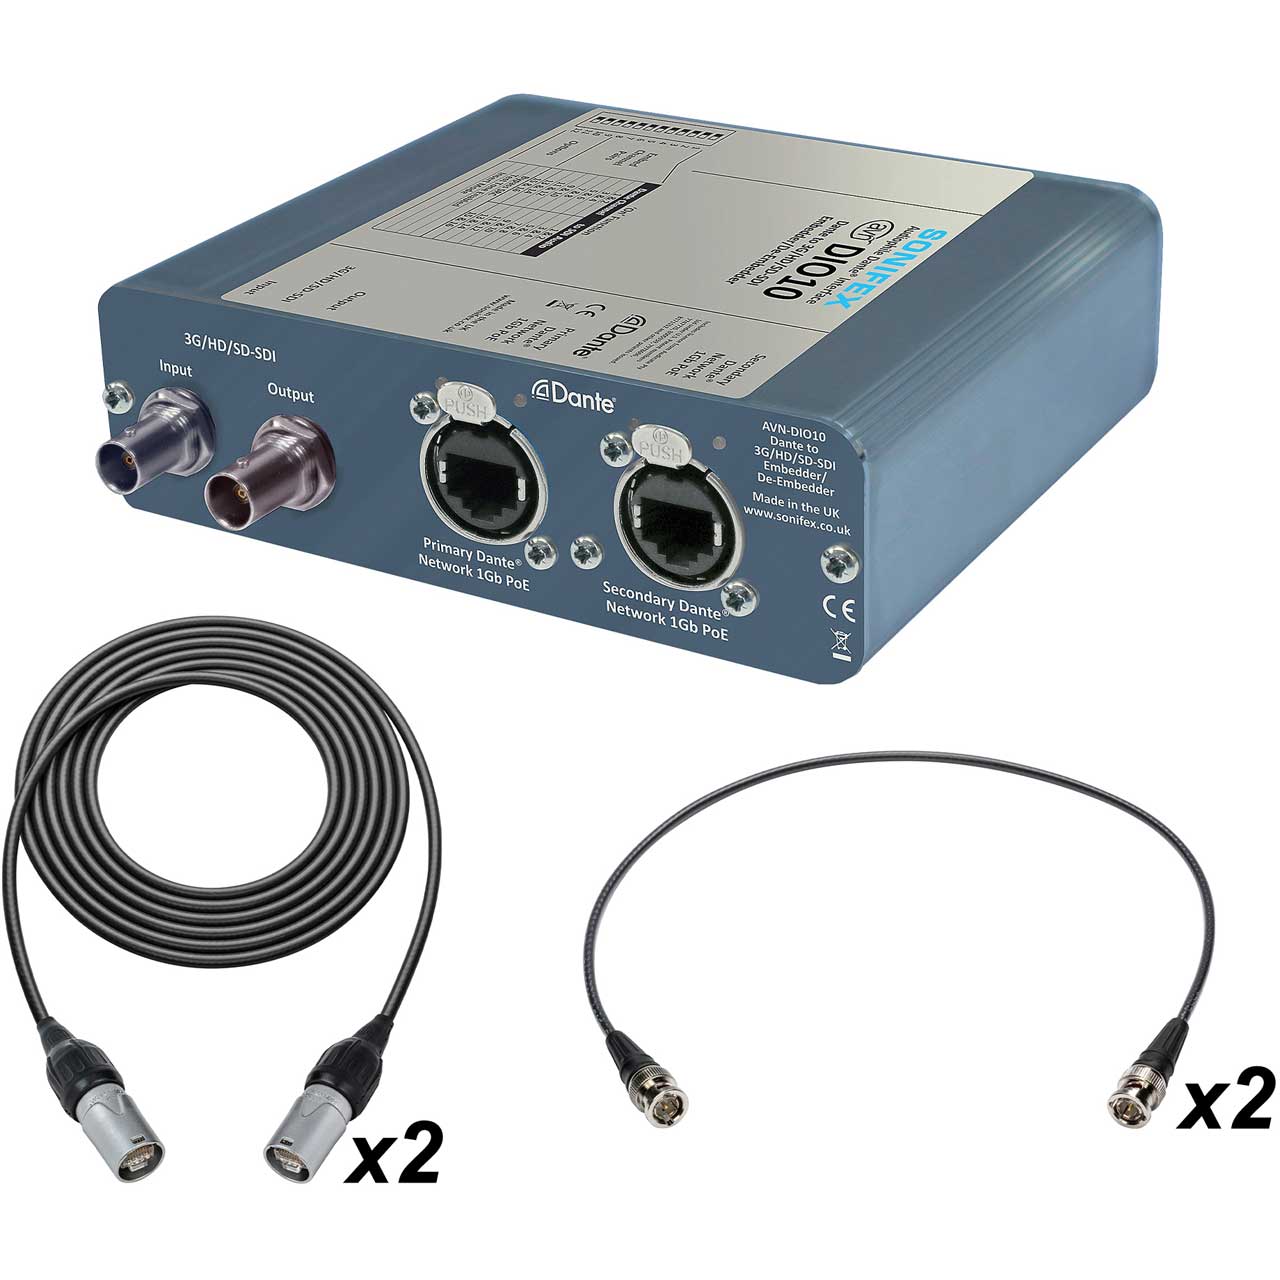 Sonifex AVN-DIO10 Dante to SDI Embedder/De-embedder Kit with SDI and Ethercon Cables AVNDIO10-KIT